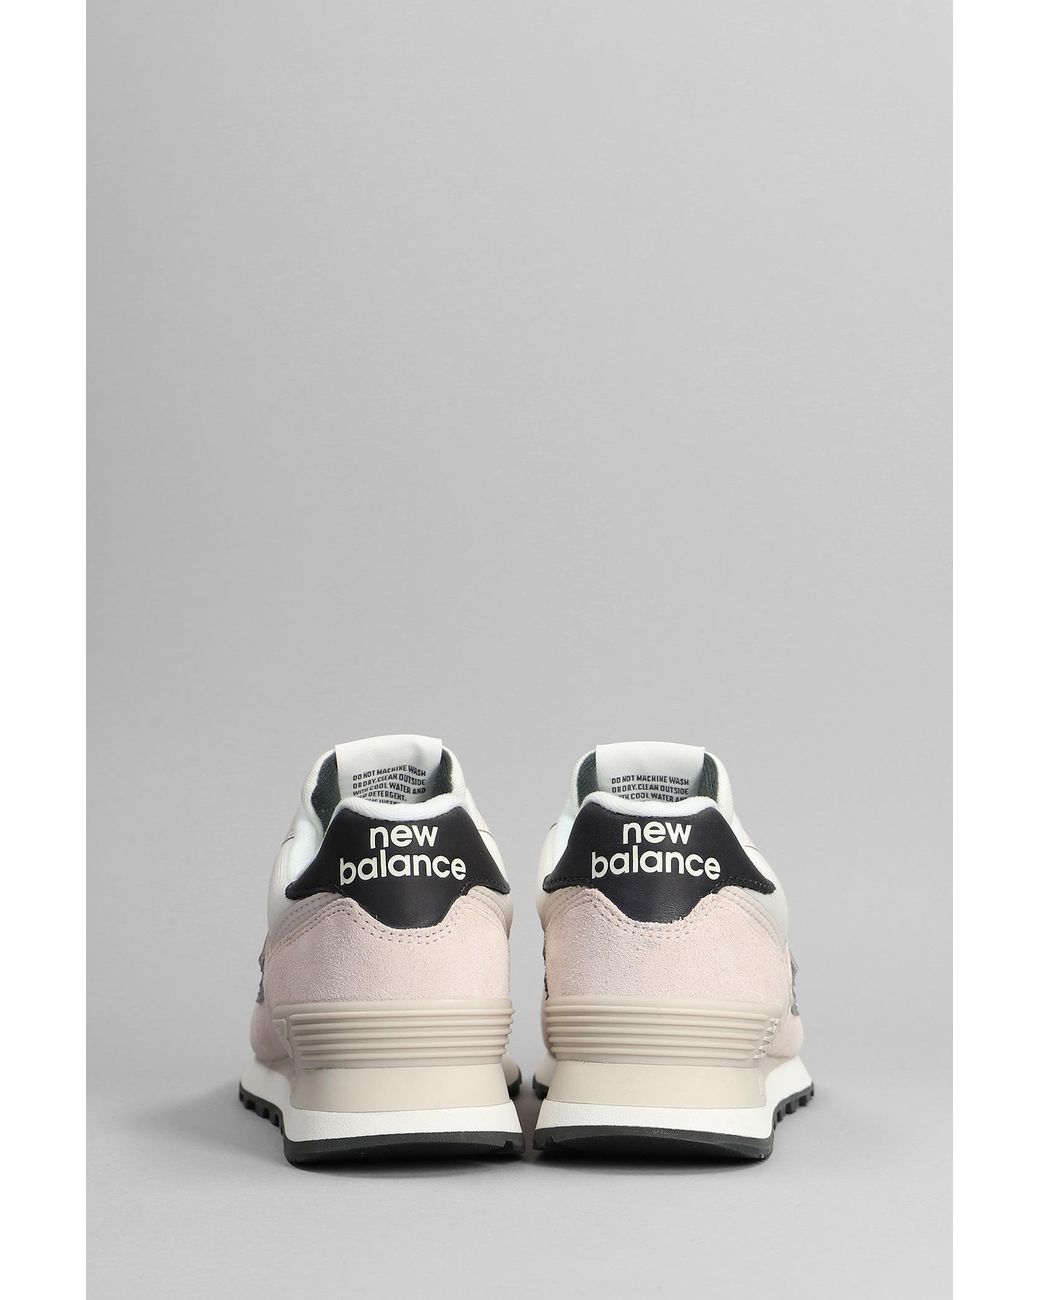 New Balance 574 Sneakers In Rose-pink Suede And Fabric in White | Lyst